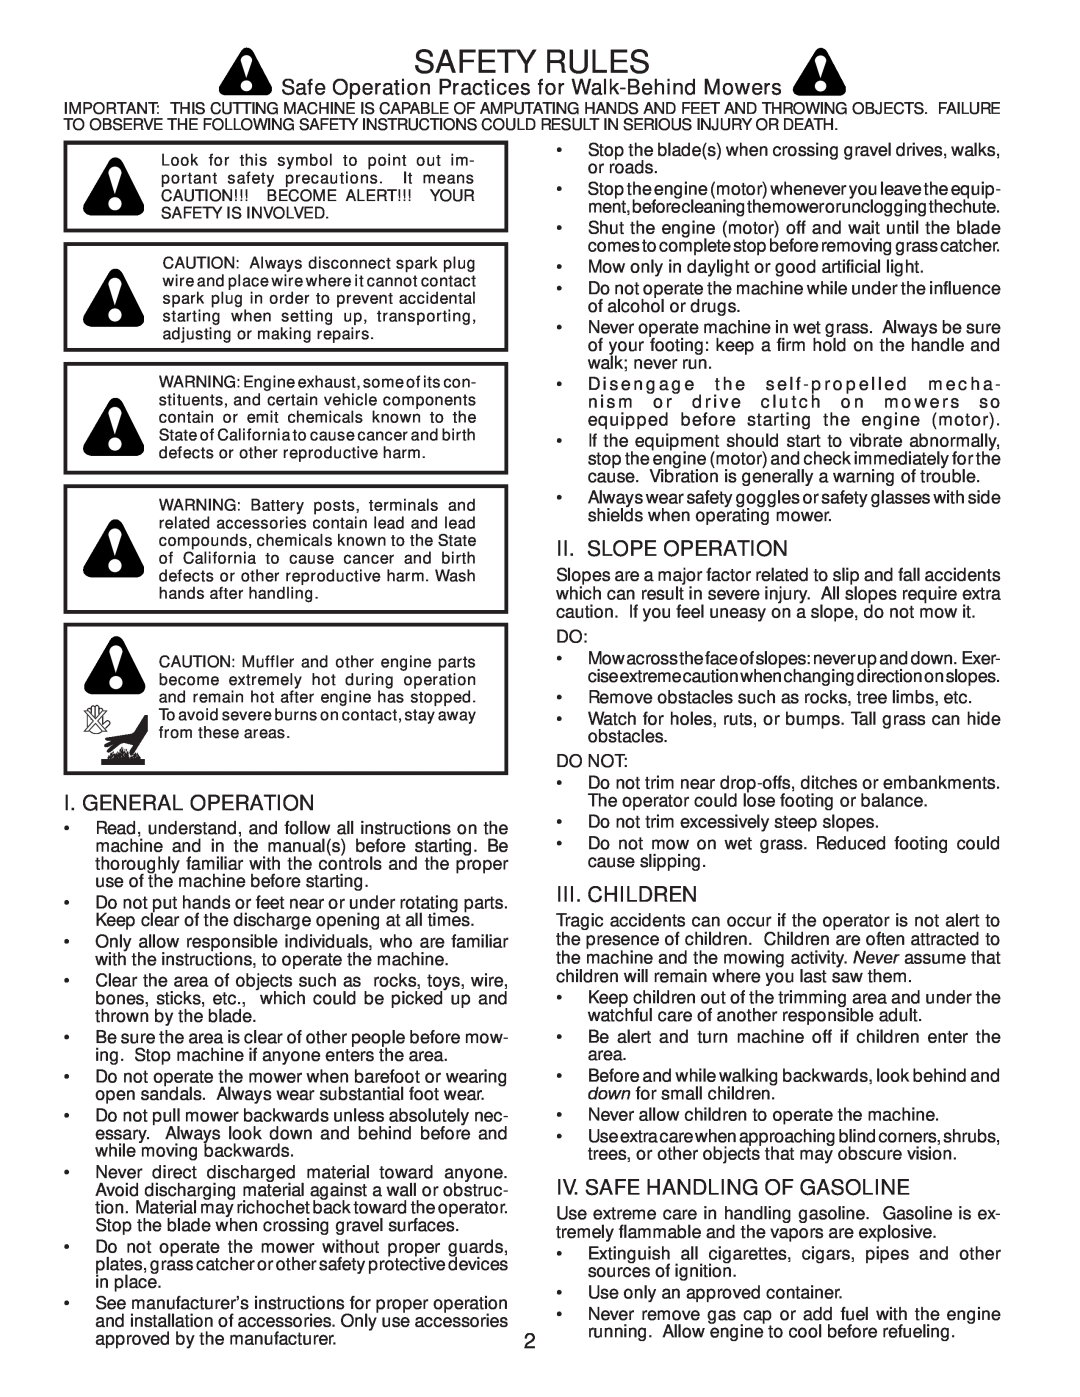 Husqvarna 532424695 Safety Rules, Safe Operation Practices for Walk-BehindMowers, Ii. Slope Operation, Iii. Children 